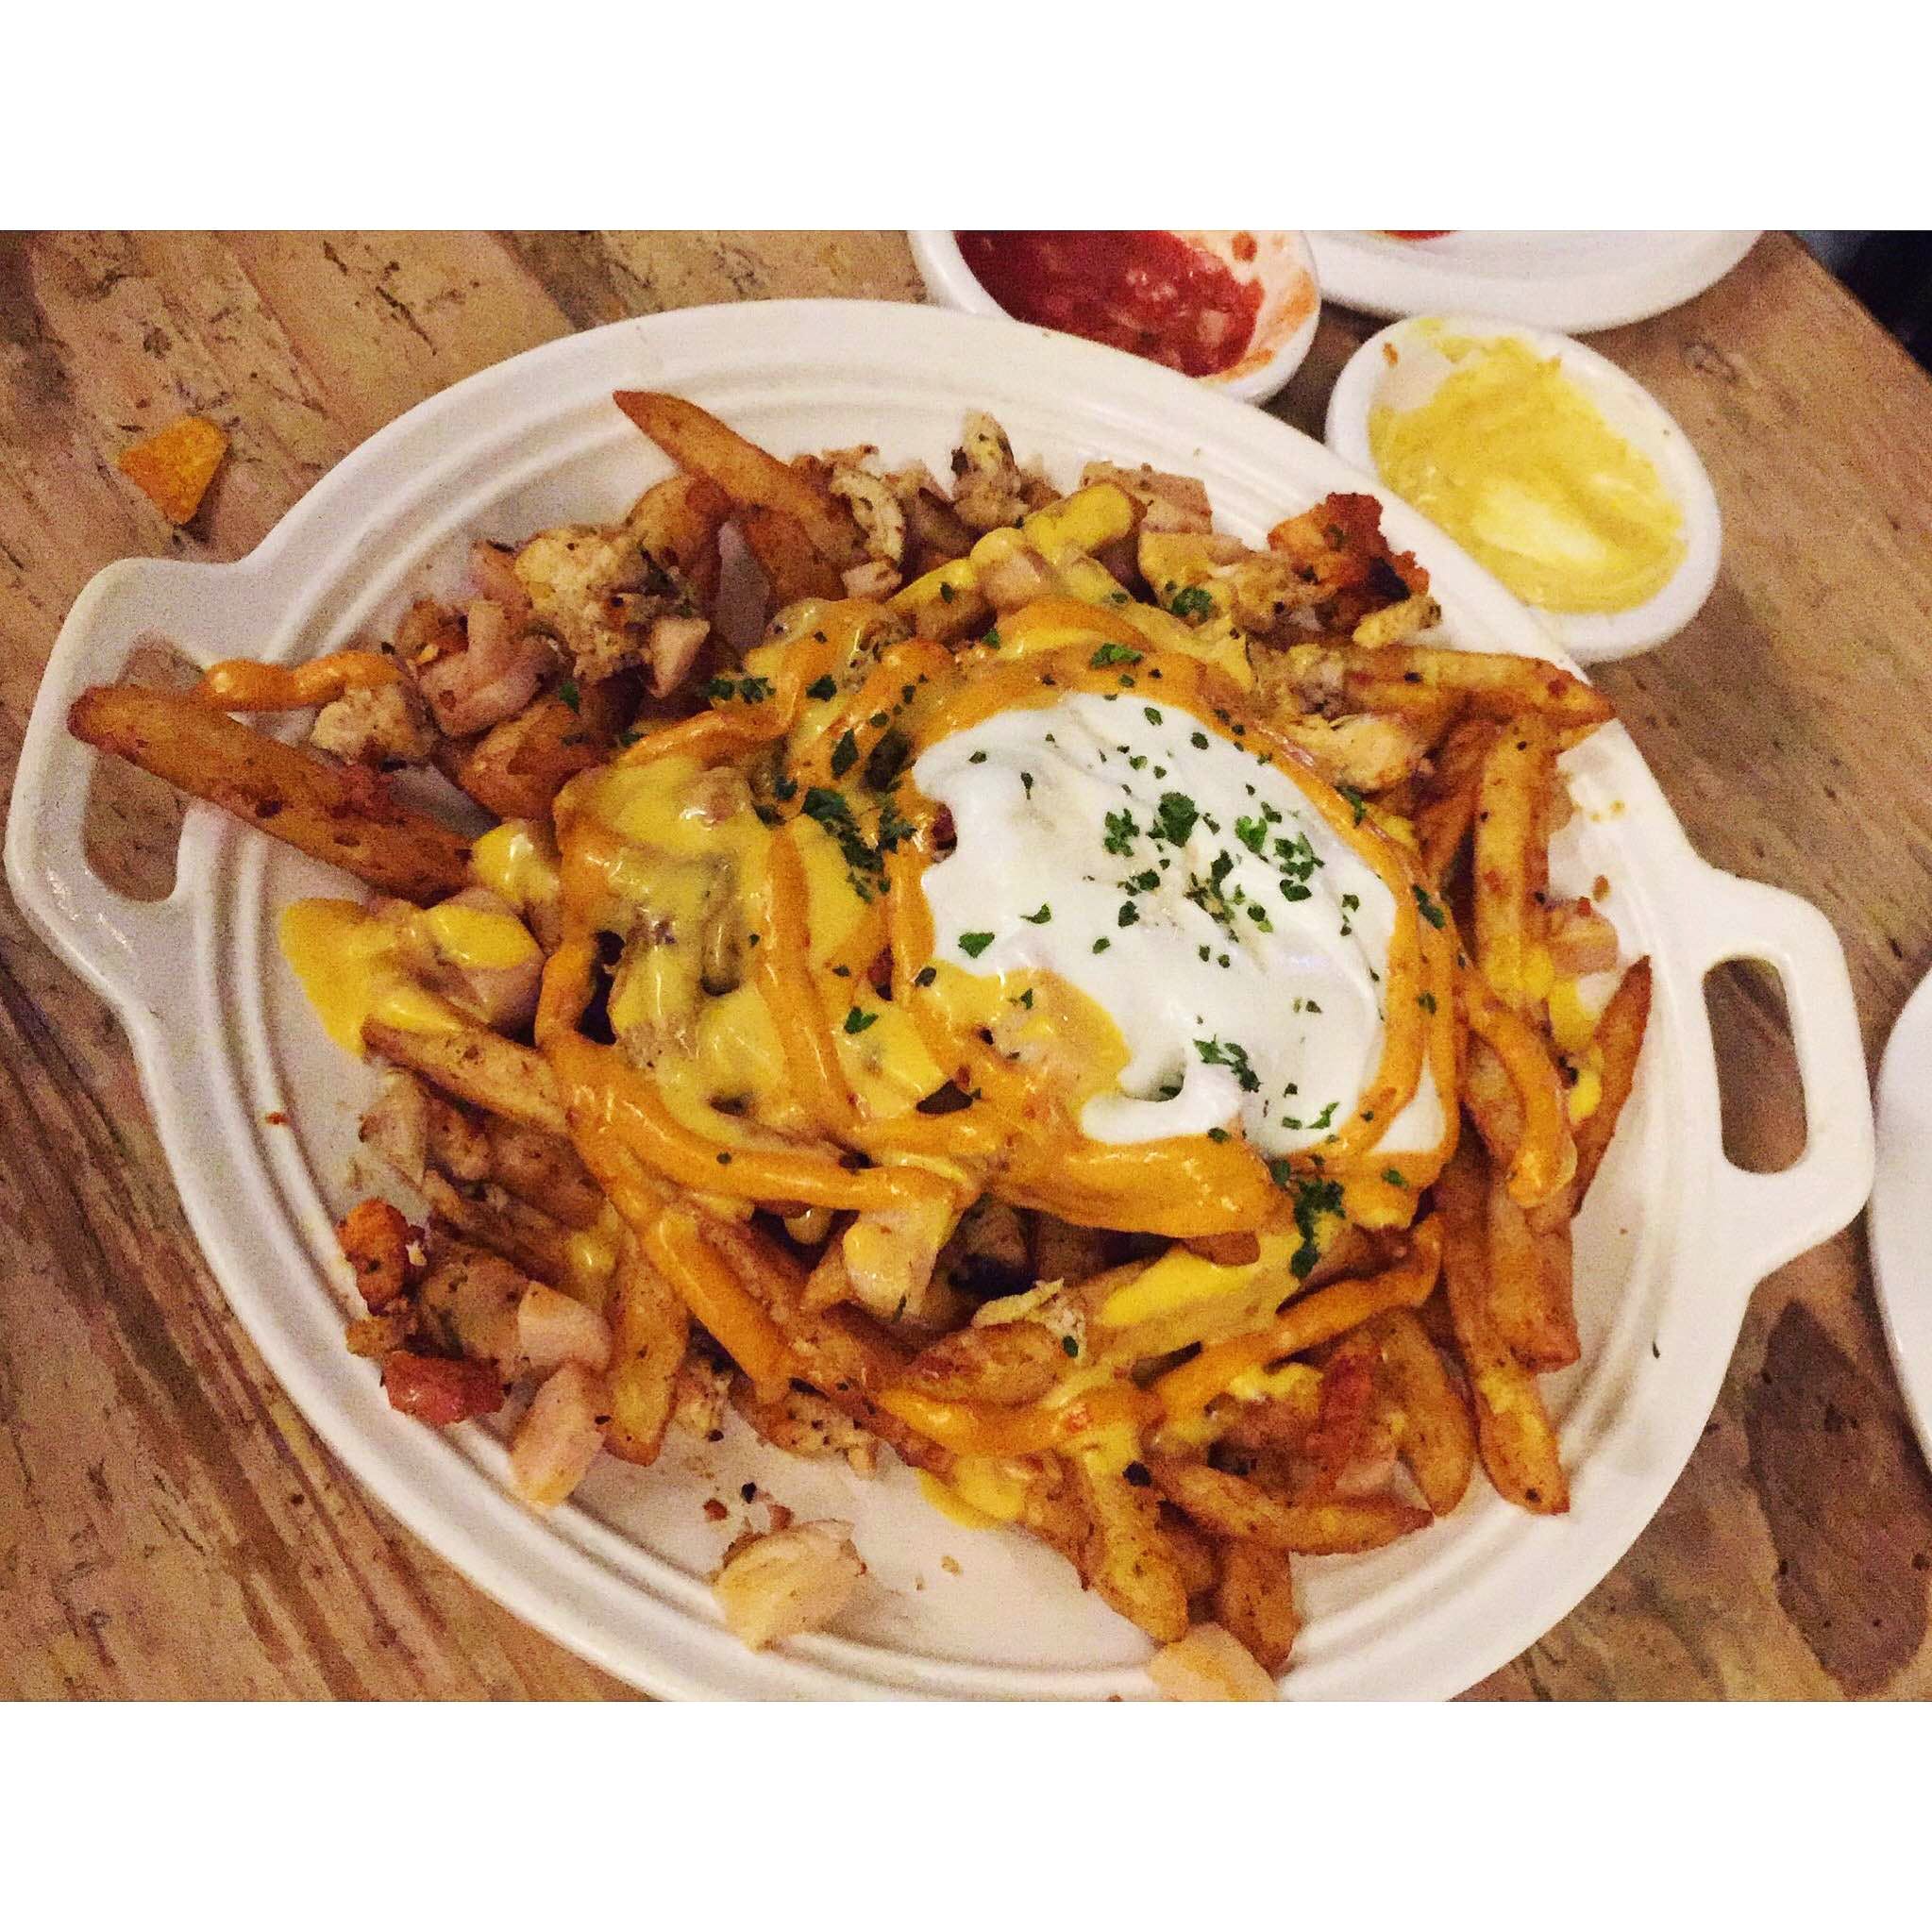 Dish,Food,Cuisine,Poutine,Ingredient,Cheese fries,French fries,Fried food,Brunch,Meat